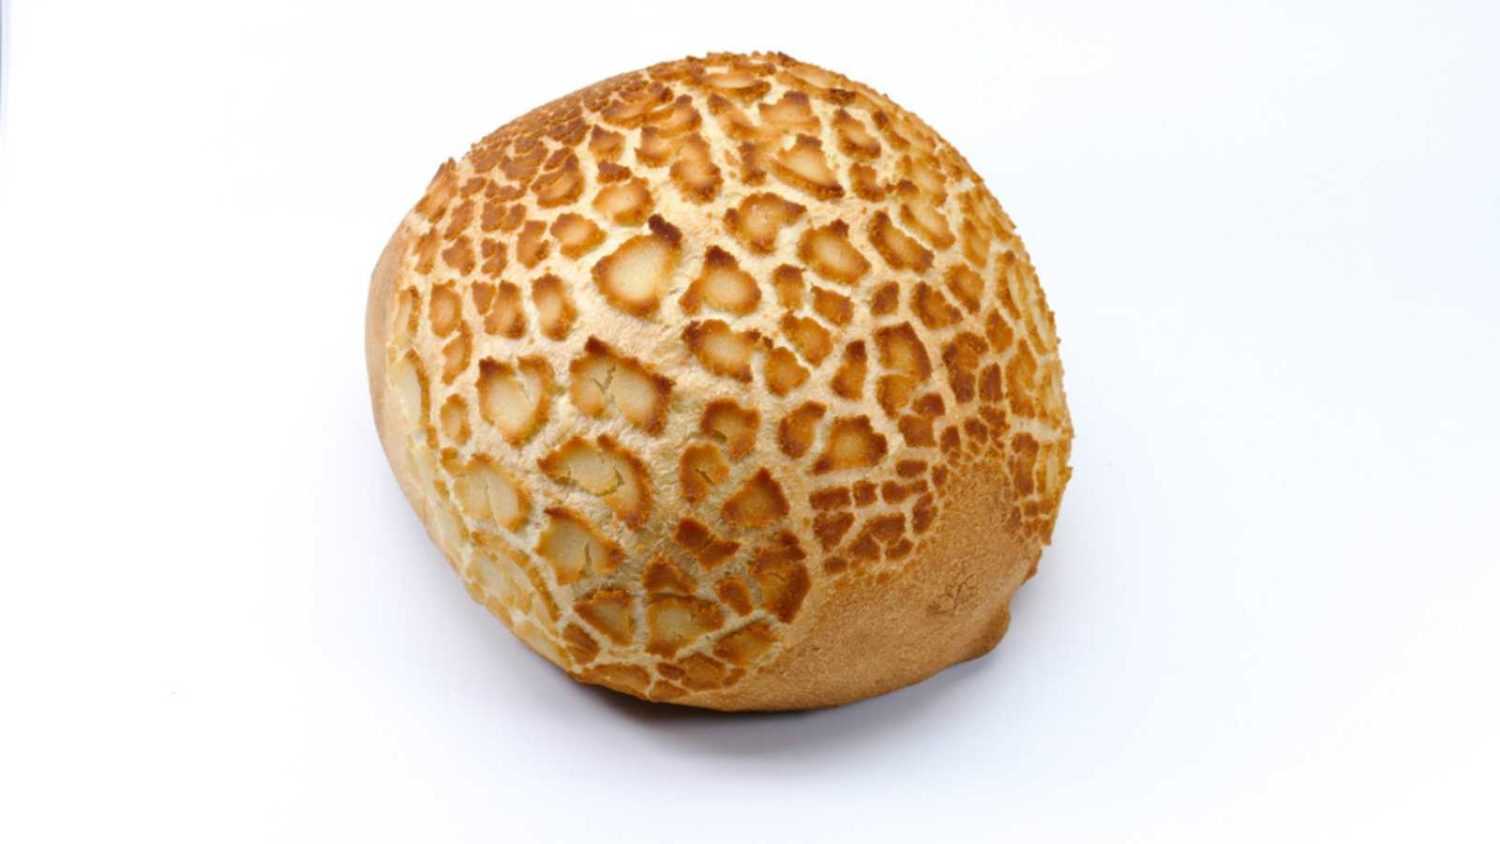 Tiger Bread or Giraffe Bread from the Netherlands, known as tijgerbrood or tijgerbol or Dutch Crunch Bread, made with sesame oil and rice flour.